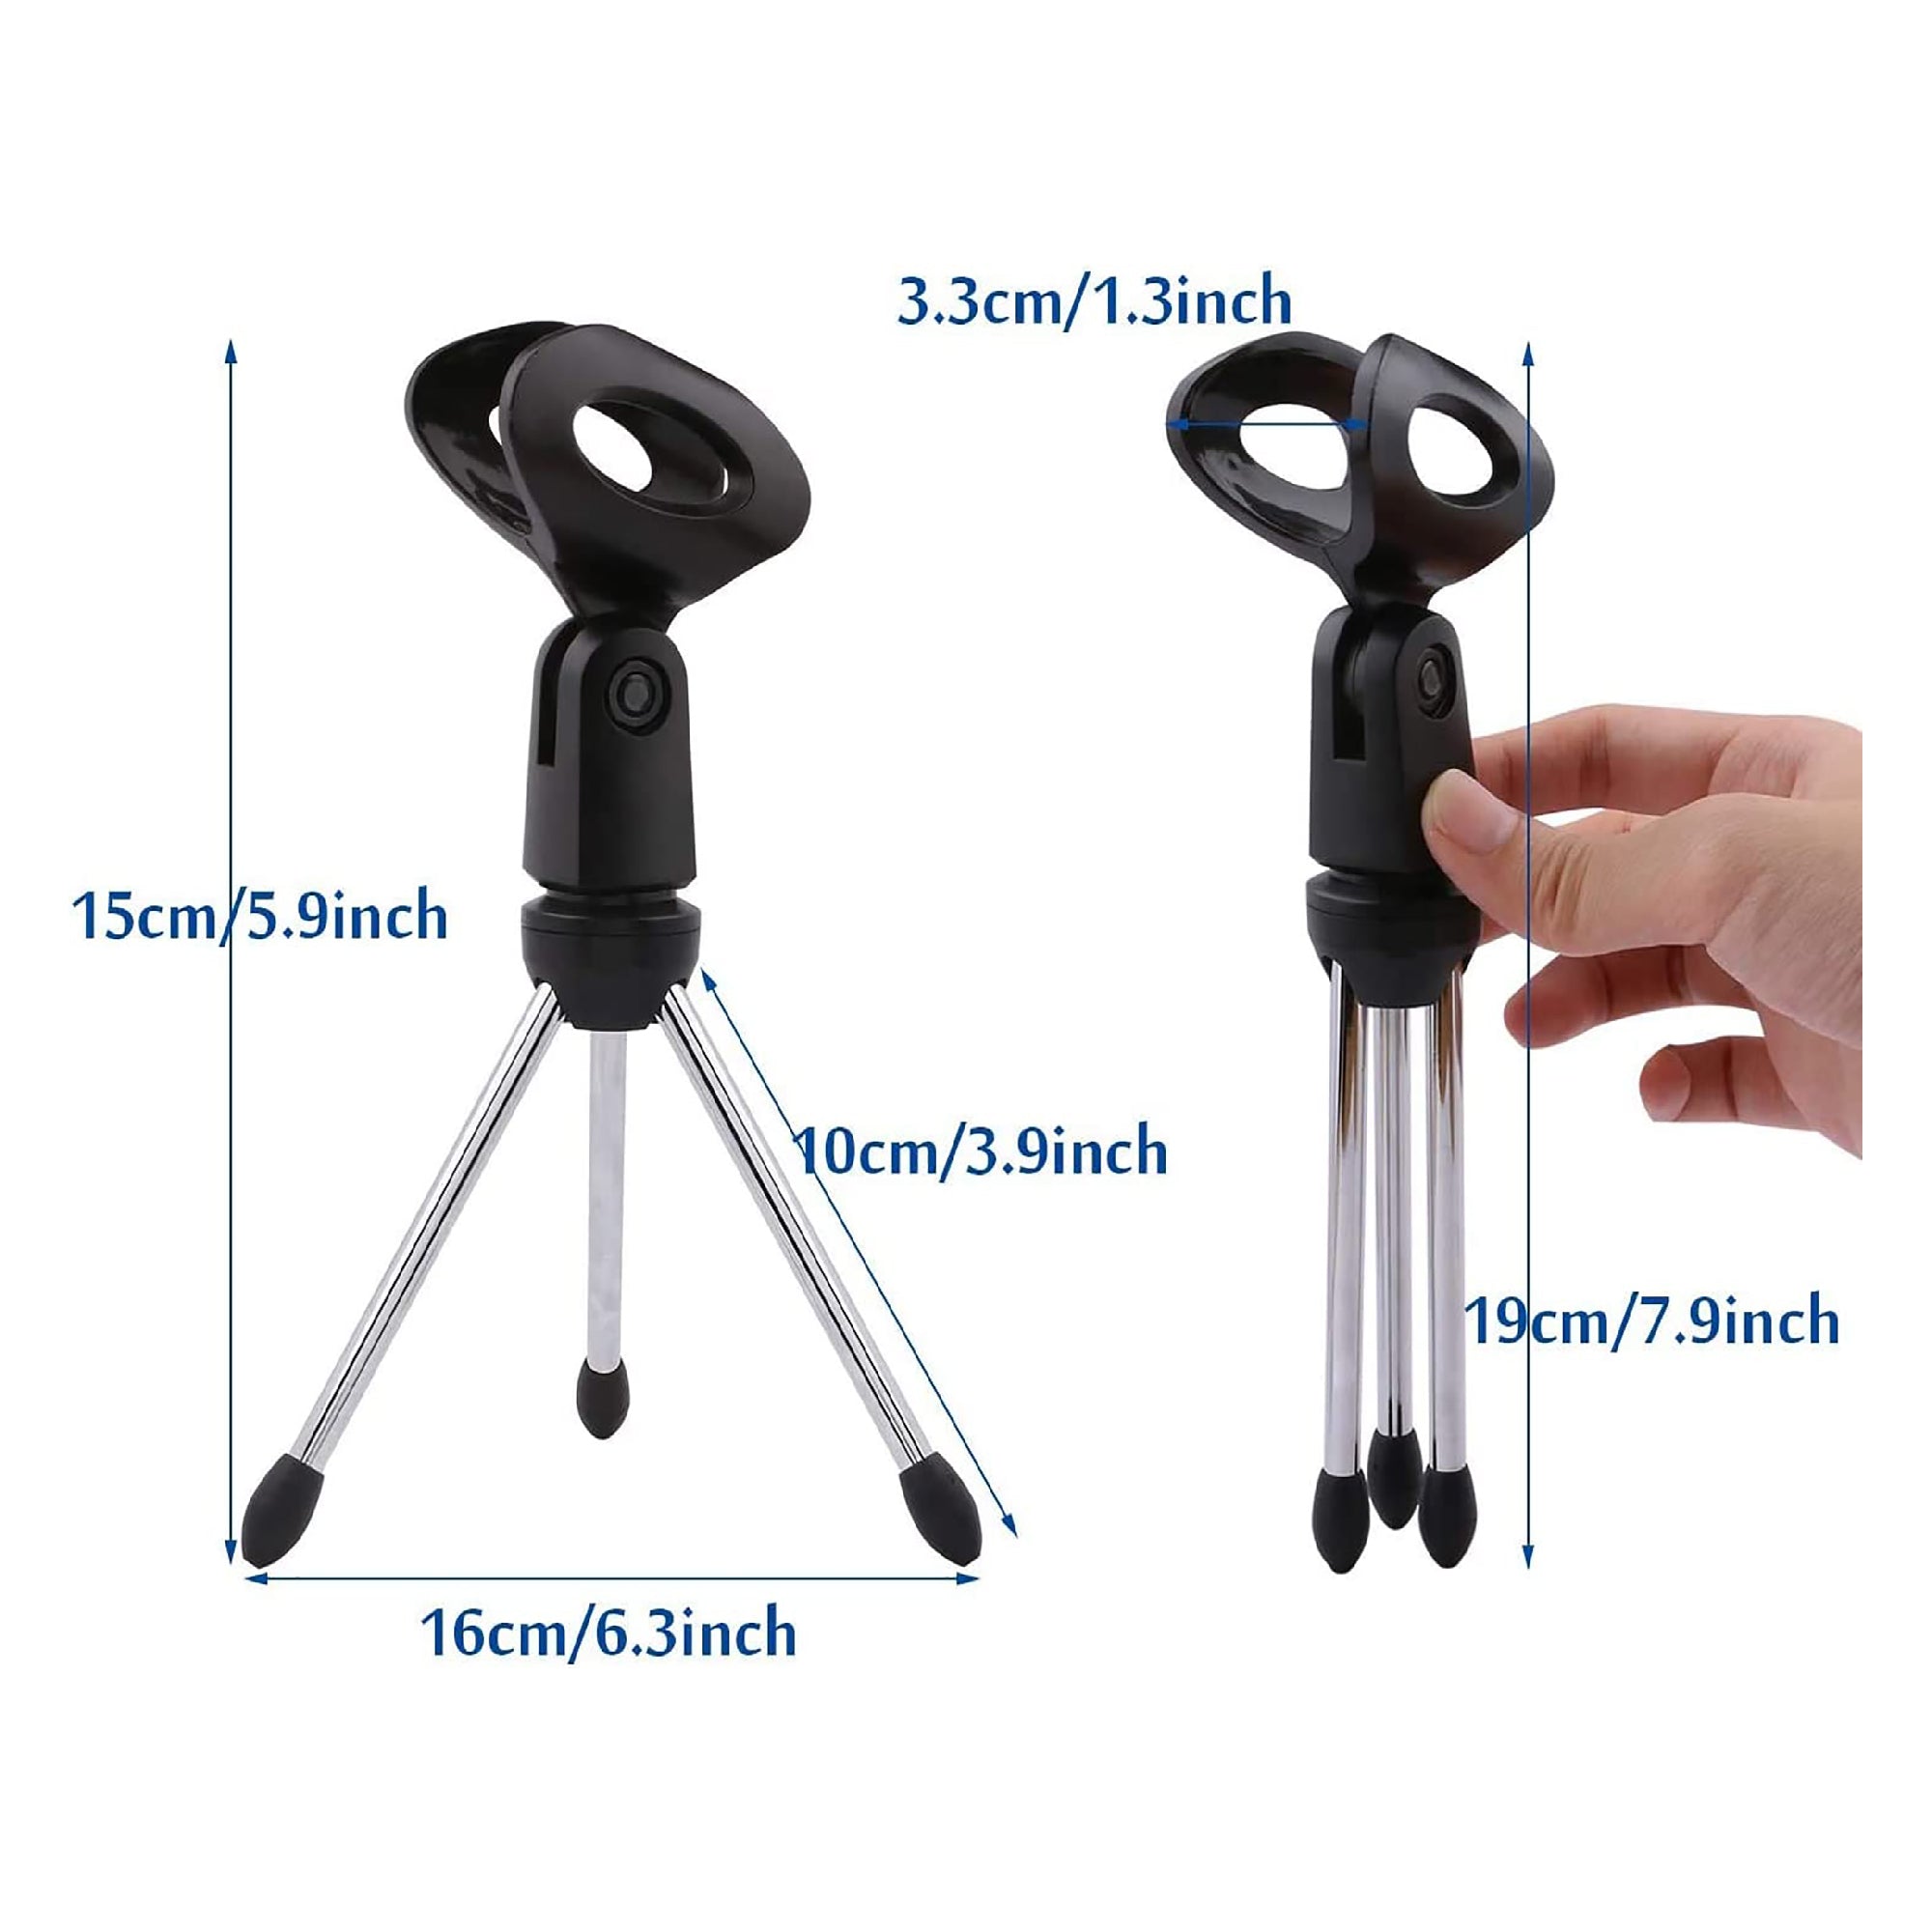 5 Core Universal Small Desktop Microphone Stand 1 Piece Adjustable Mic Clip Tabletop Mic Stand For Dynamic Wired Microphone Like Samson Q2U Shure SM58 SM57 PGA48 PGA58 - MINI TRIPOD MIC STAND